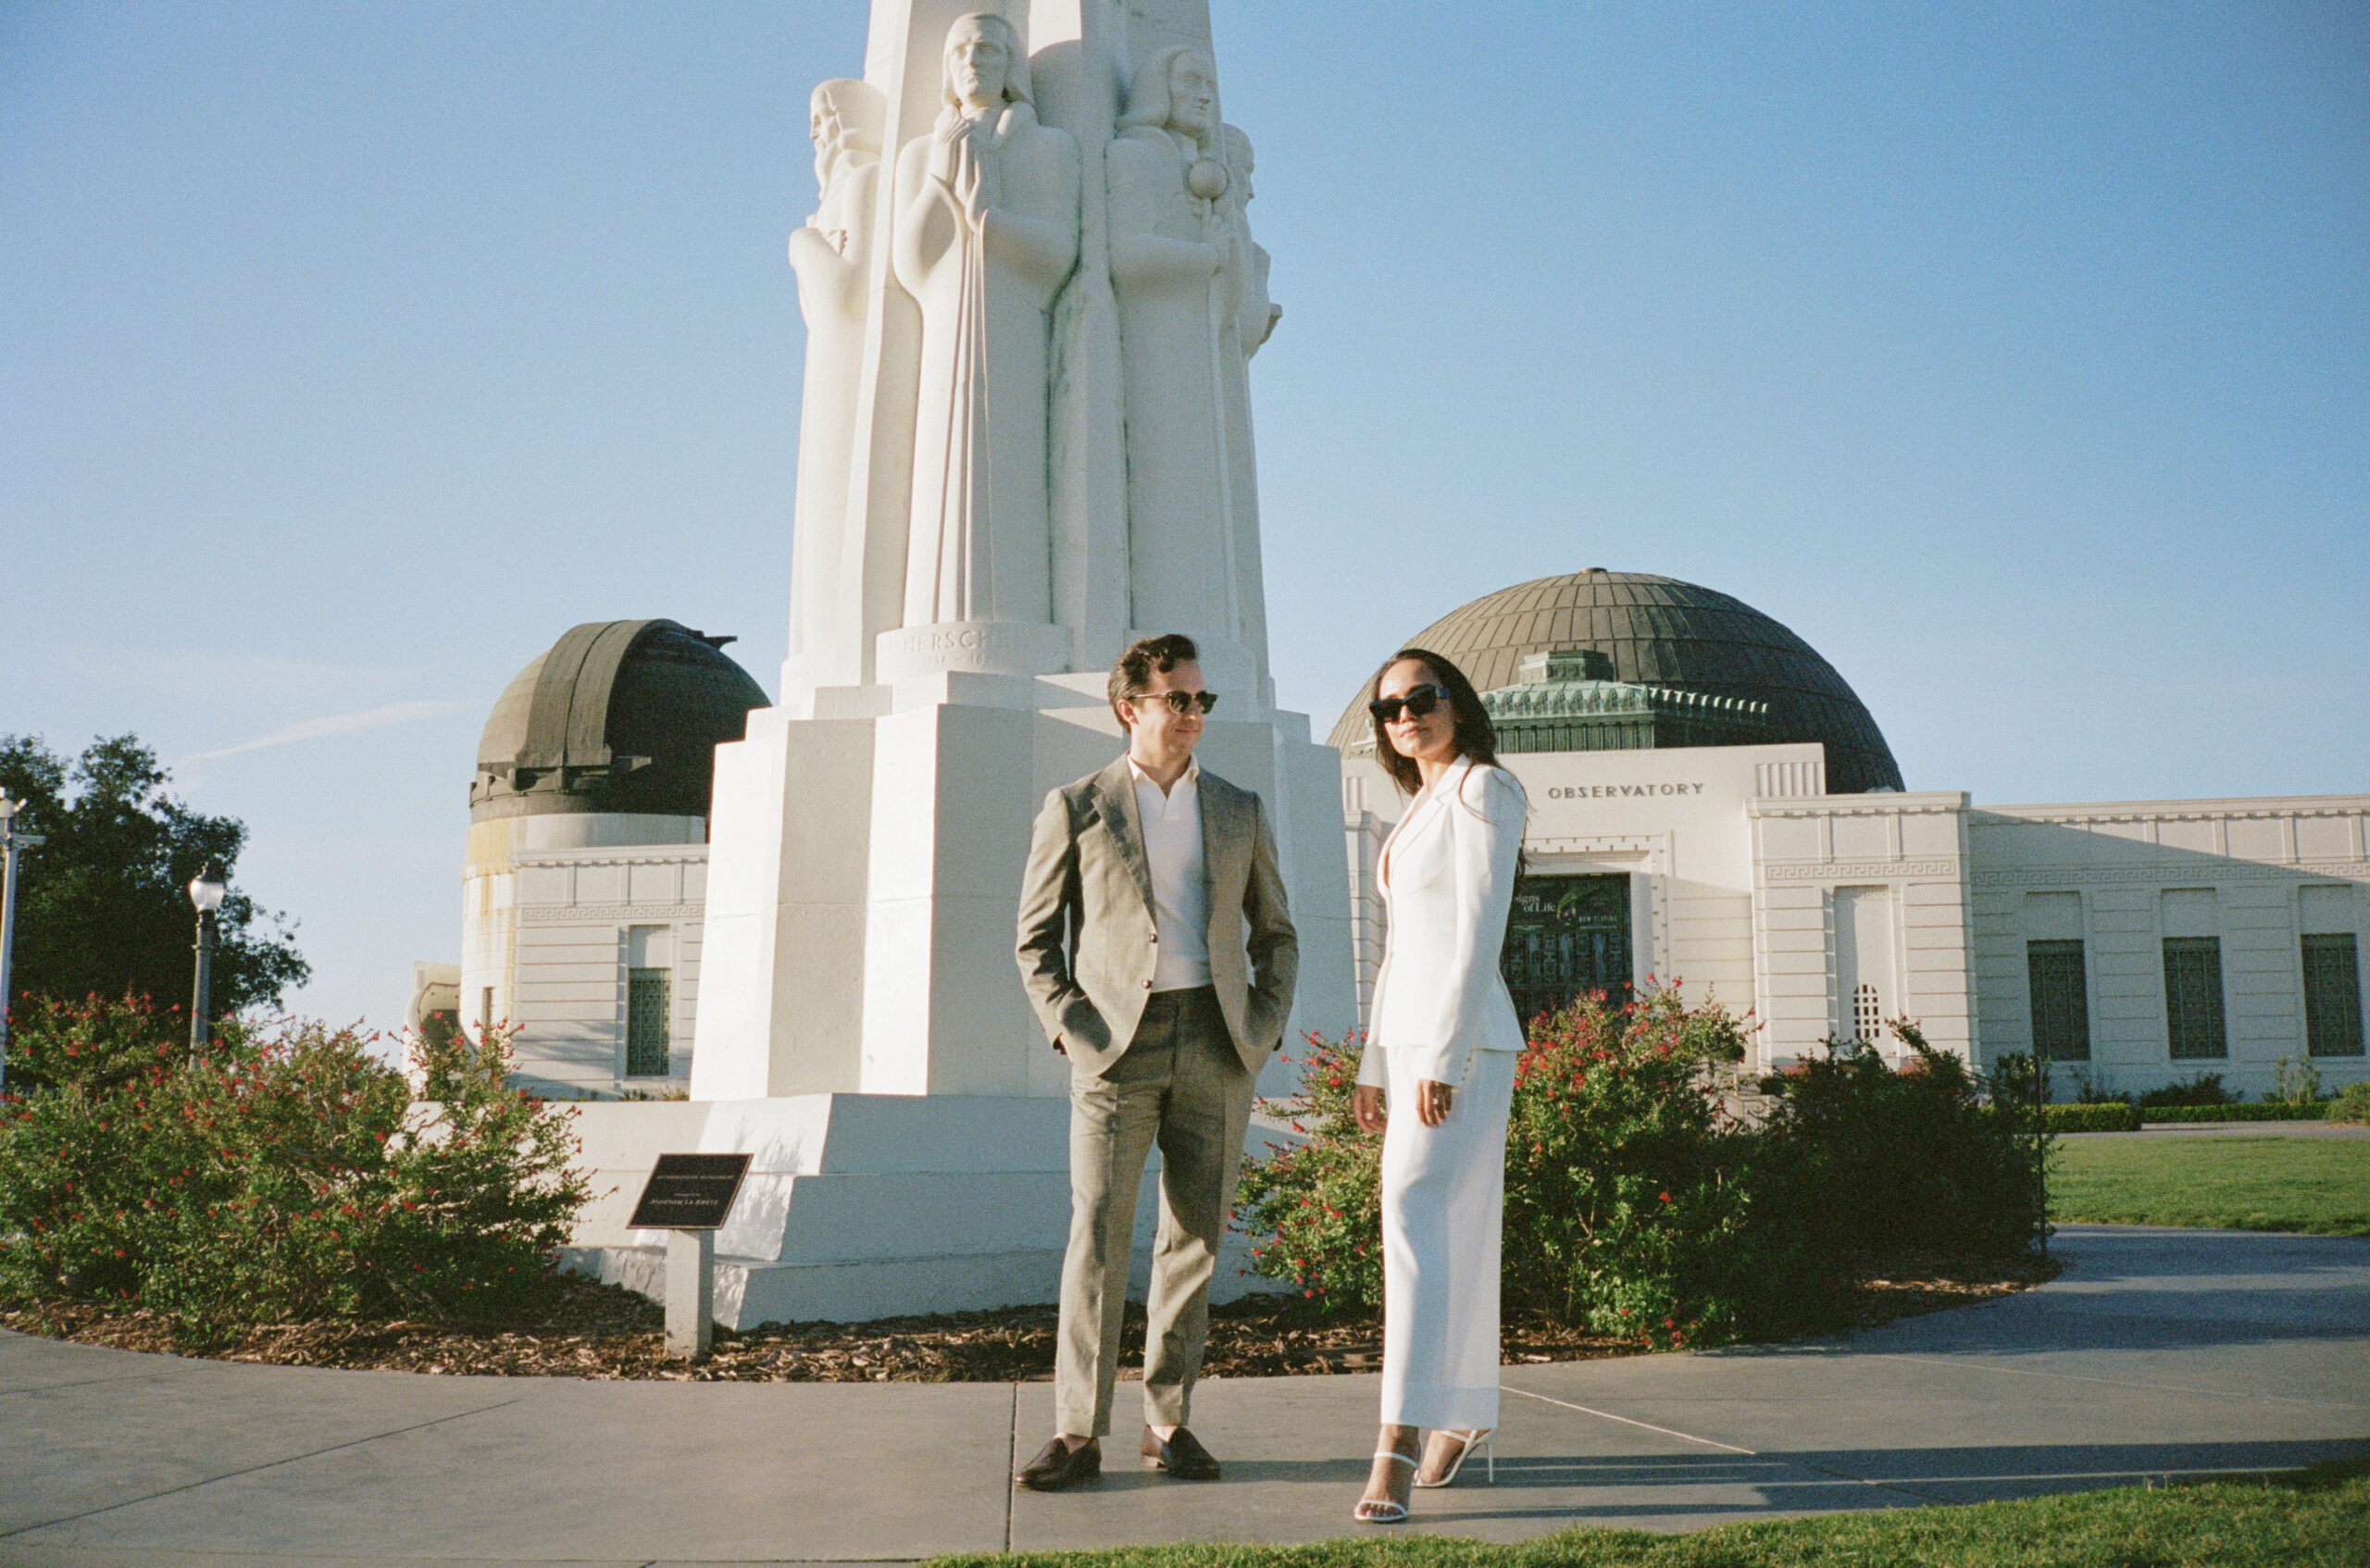 Engaged couple photoshoot at griffith observatory in los angeles.